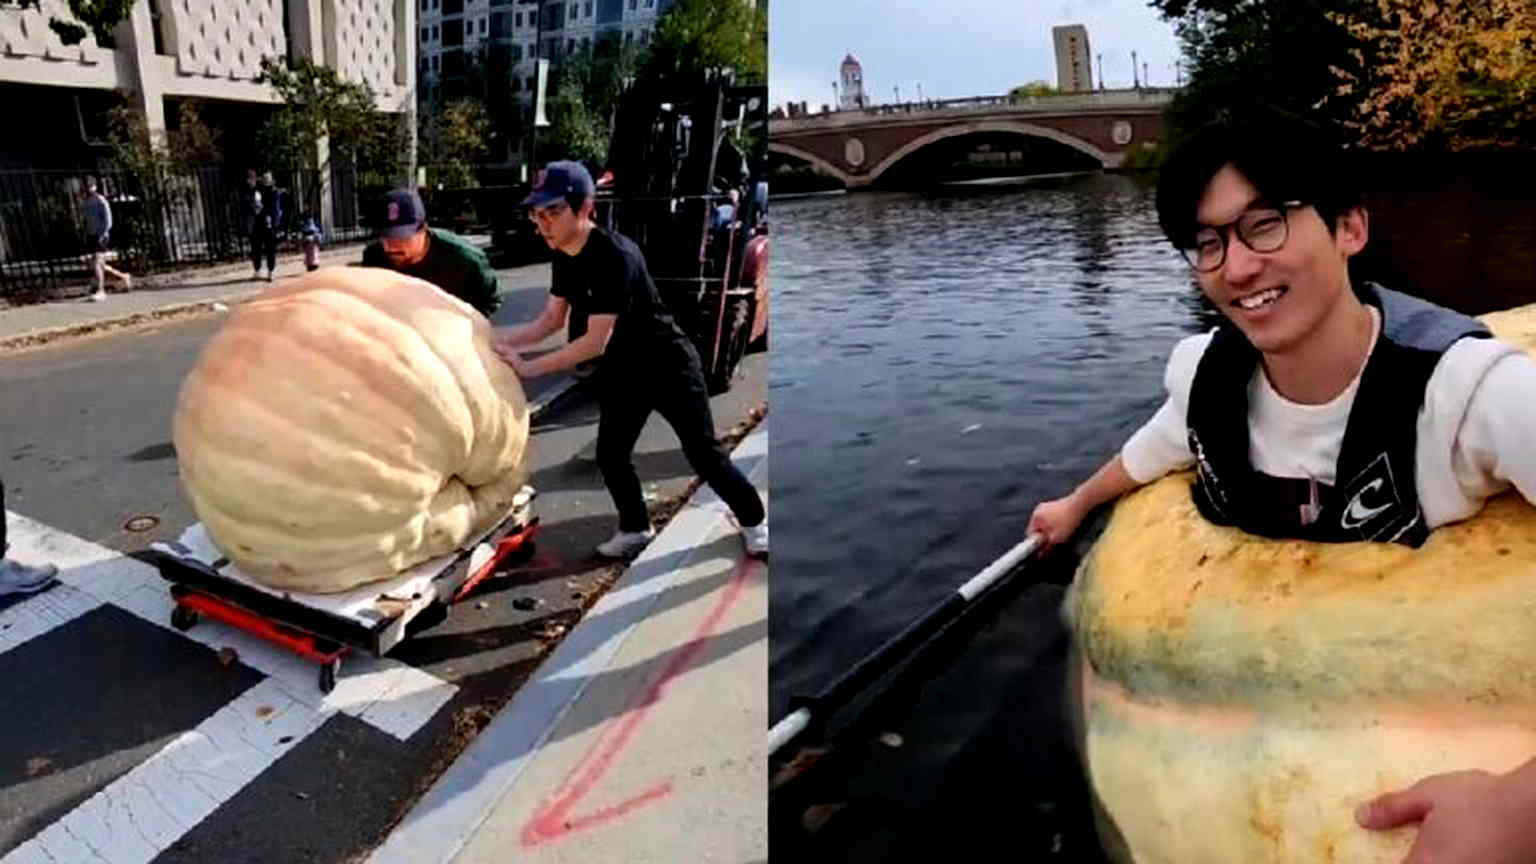 Watch: Harvard student crosses river in 1500-pound pumpkin to raise money for student lab